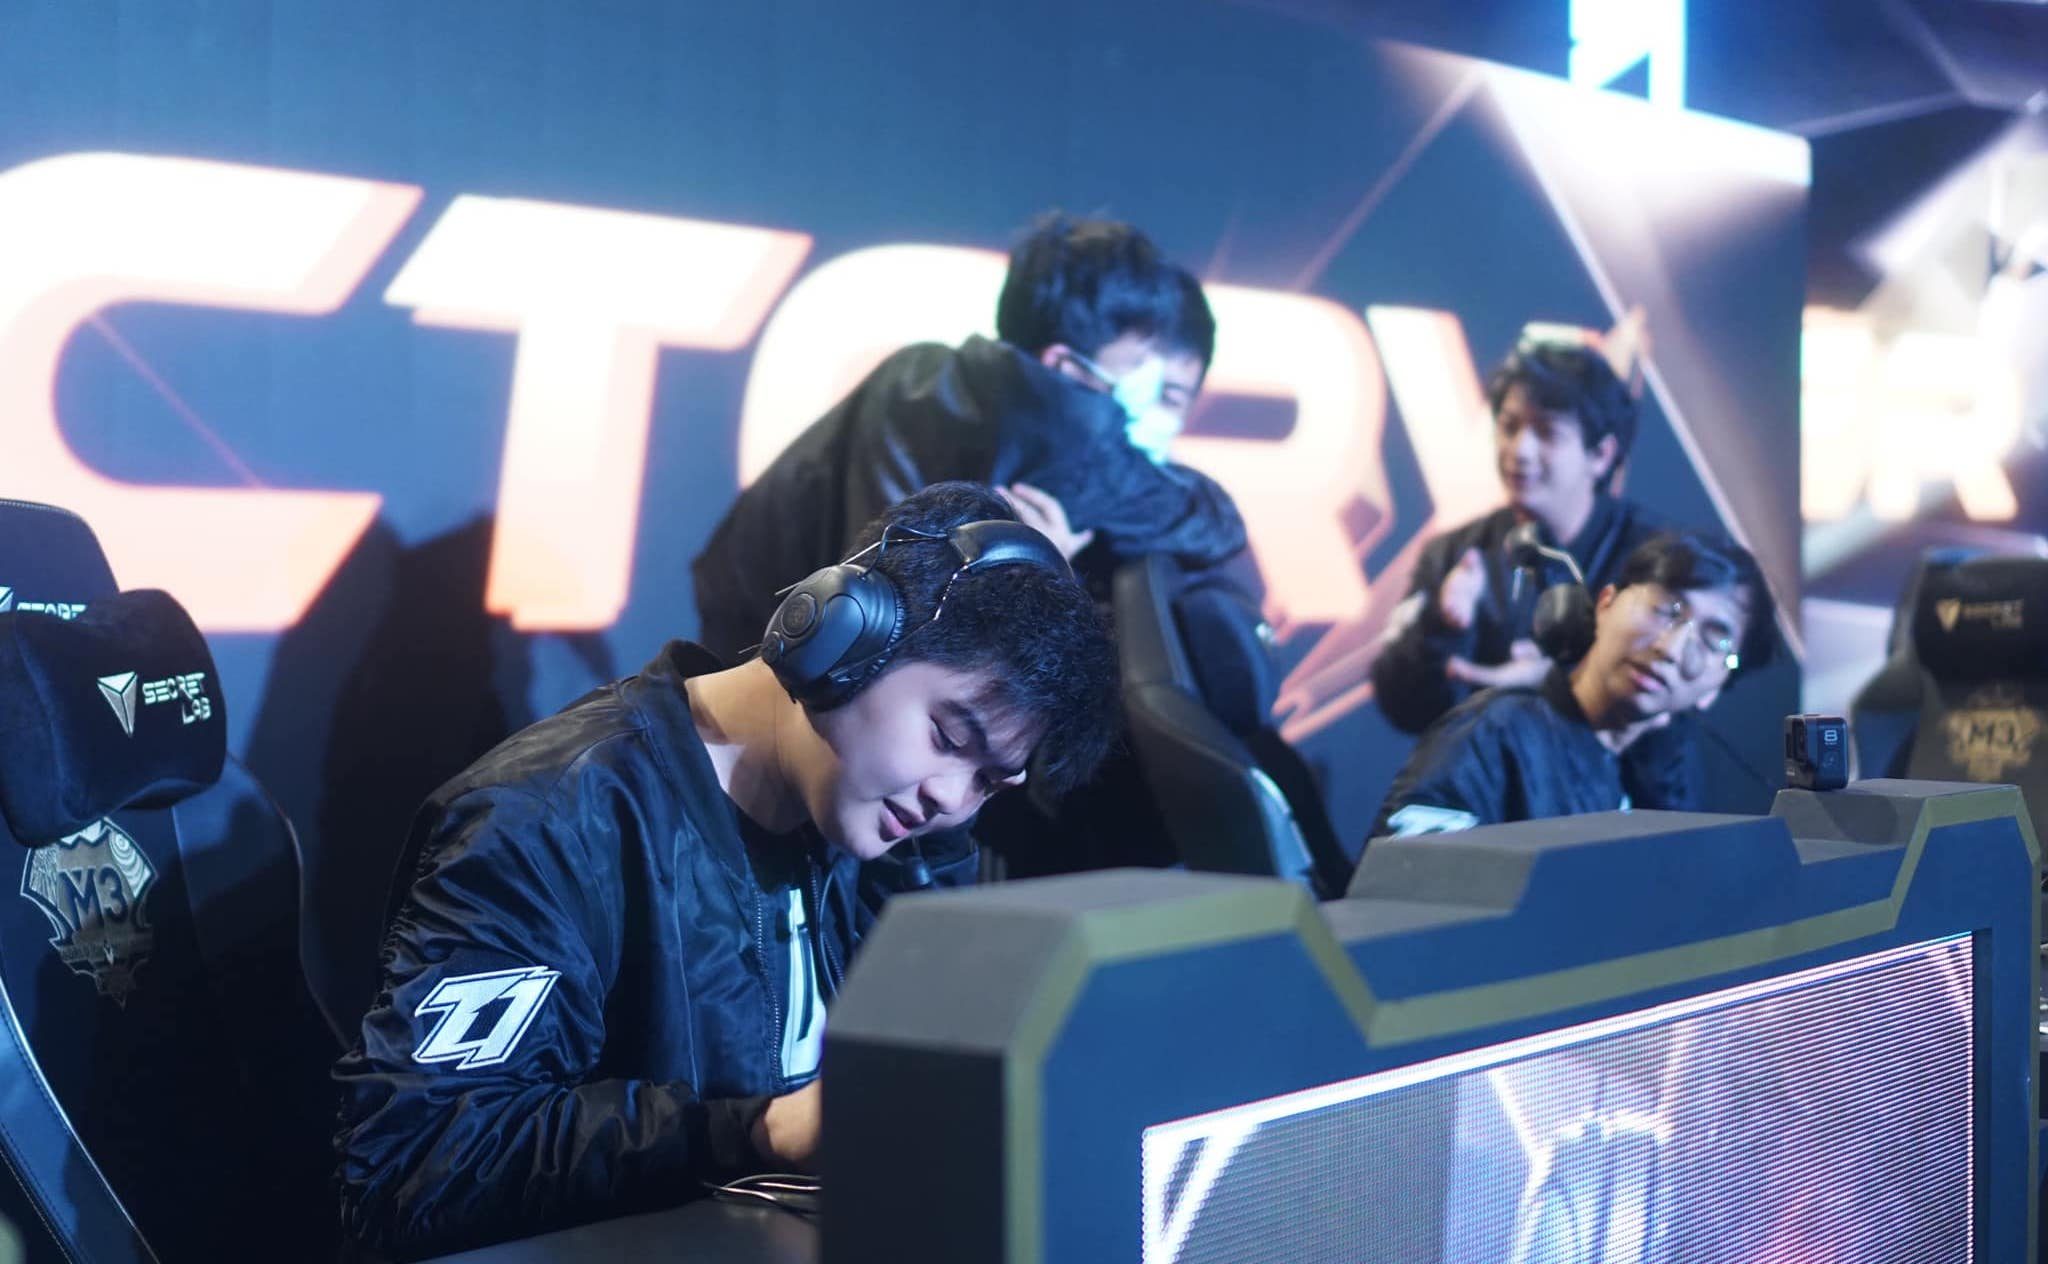 Blacklist boots out Indonesia’s Onic to stay alive in M3 World Championships